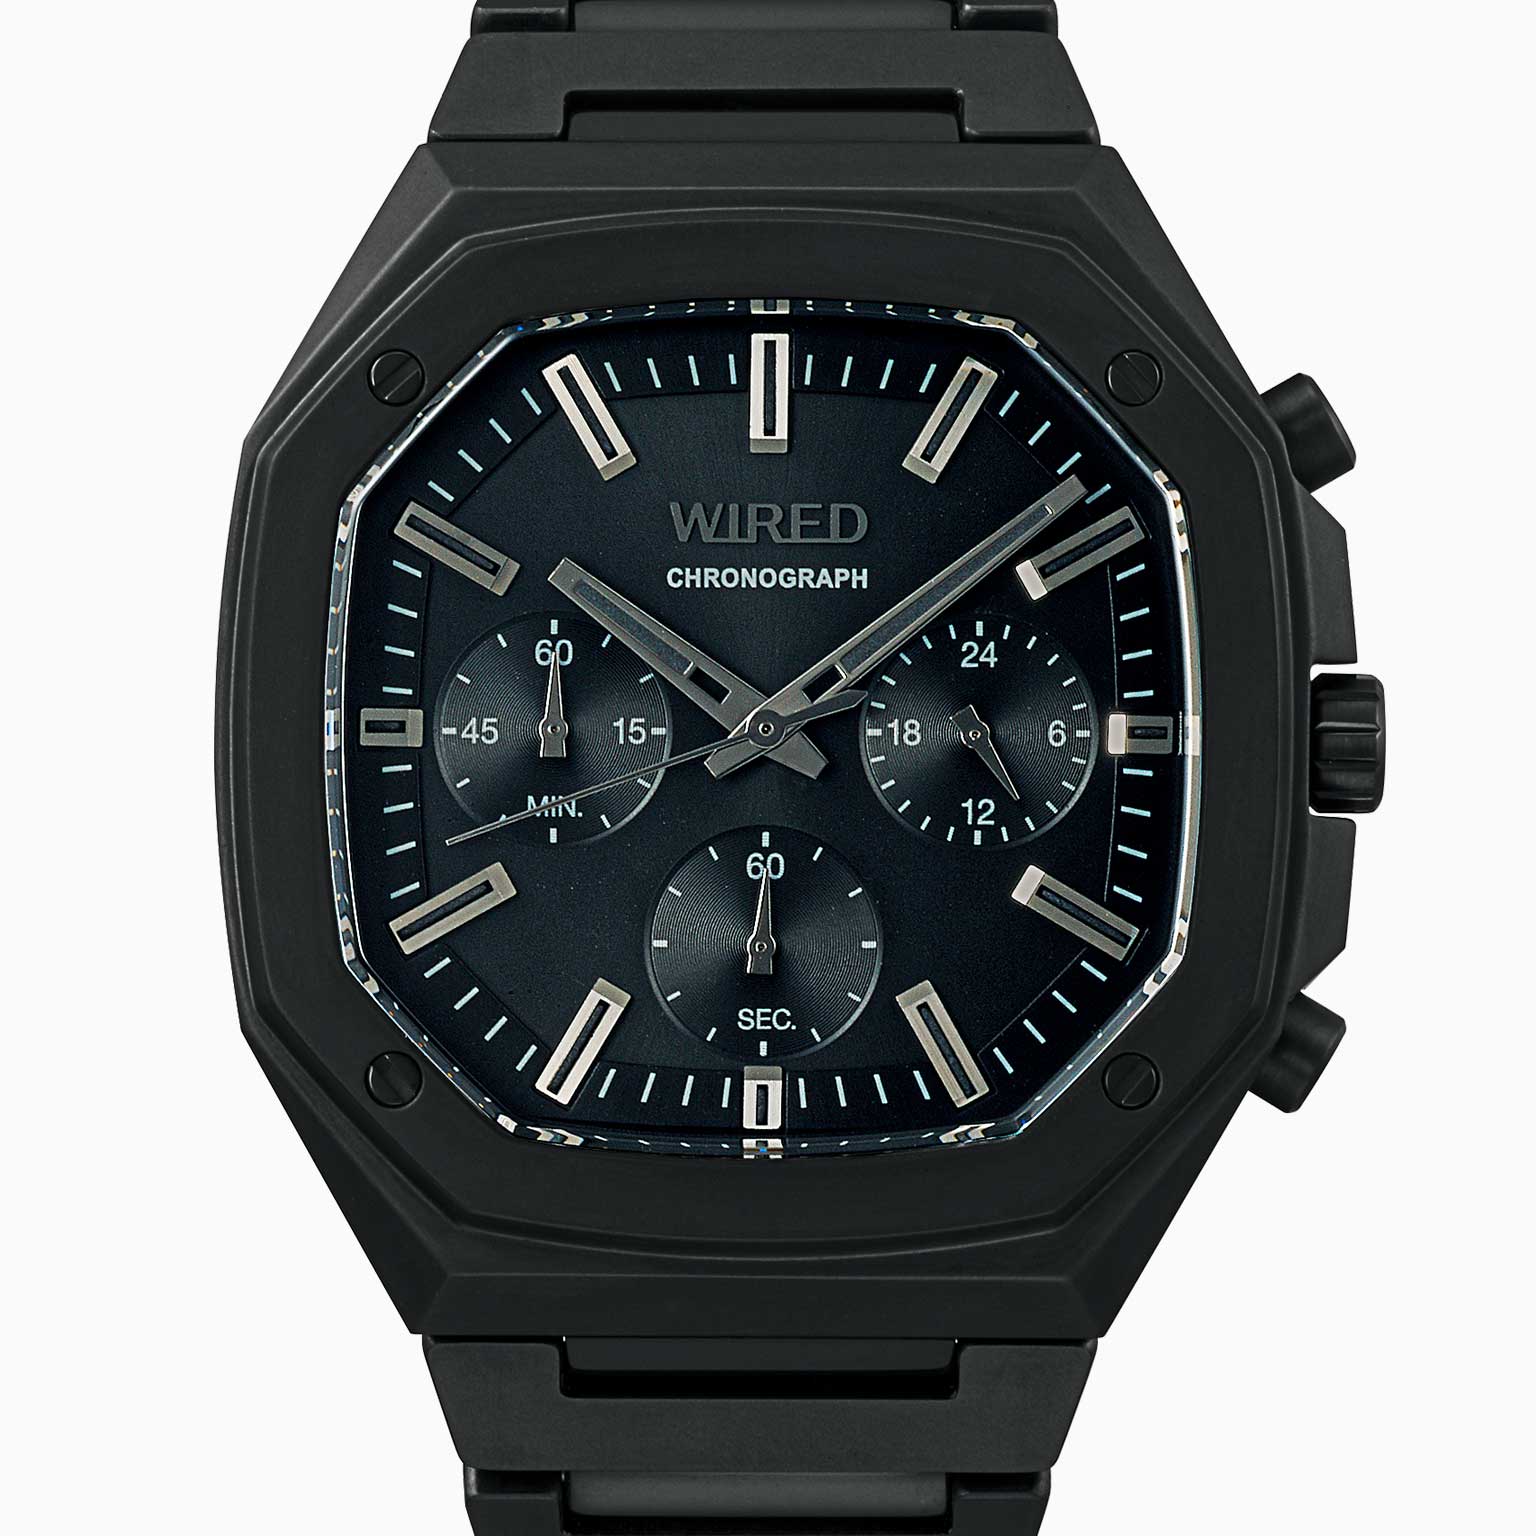 AGAT447 | WIRED